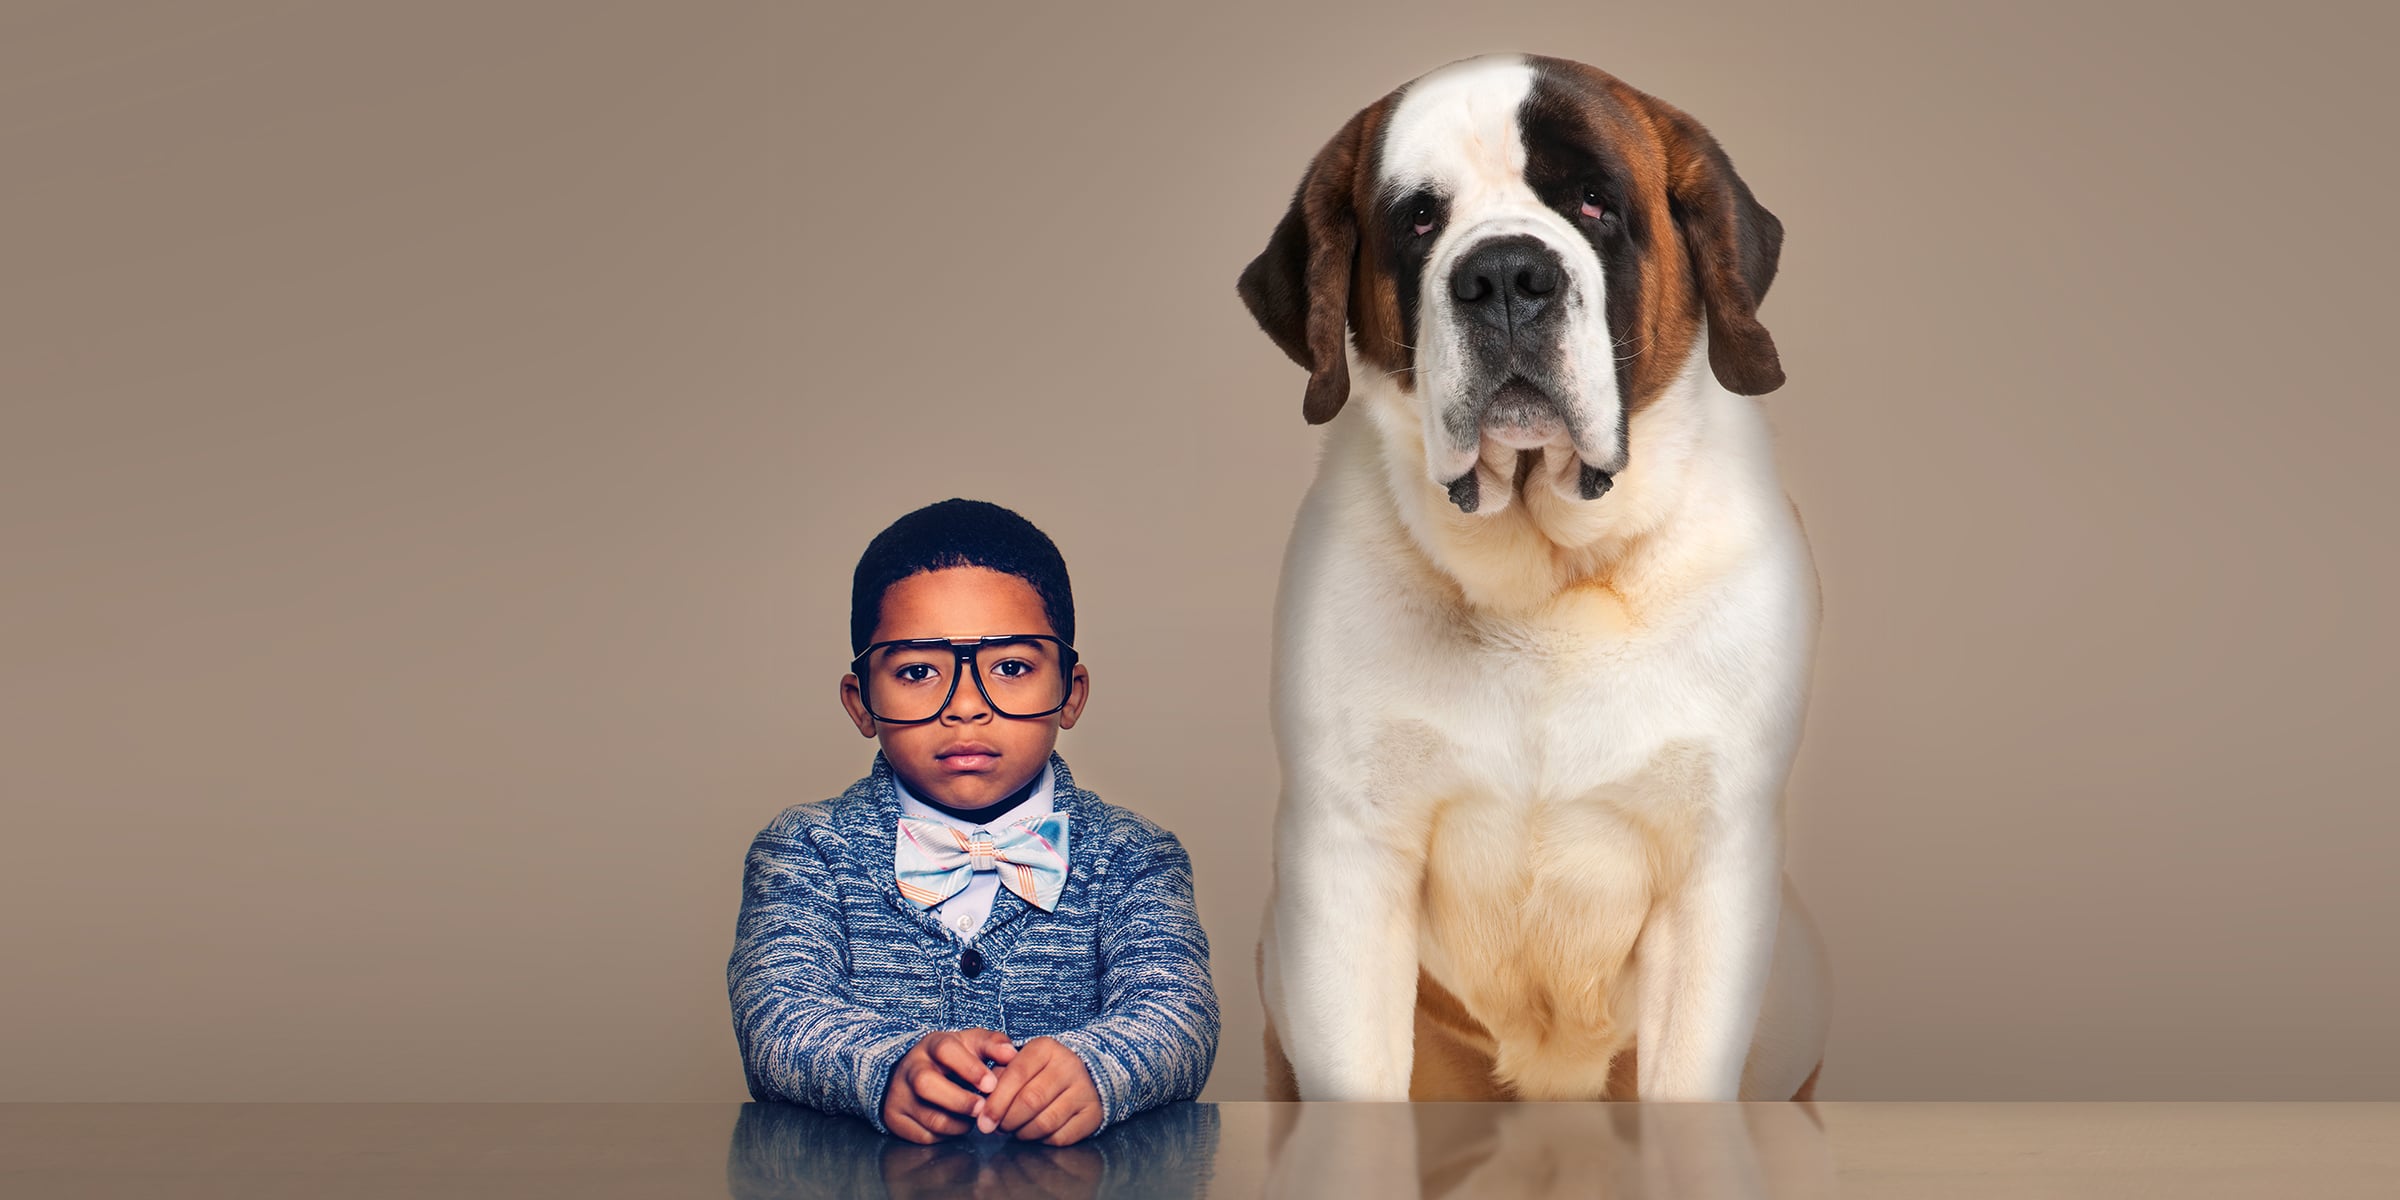 Child in cardigan, bow tie, and oversized glasses sits next to a St. Bernard at a table.